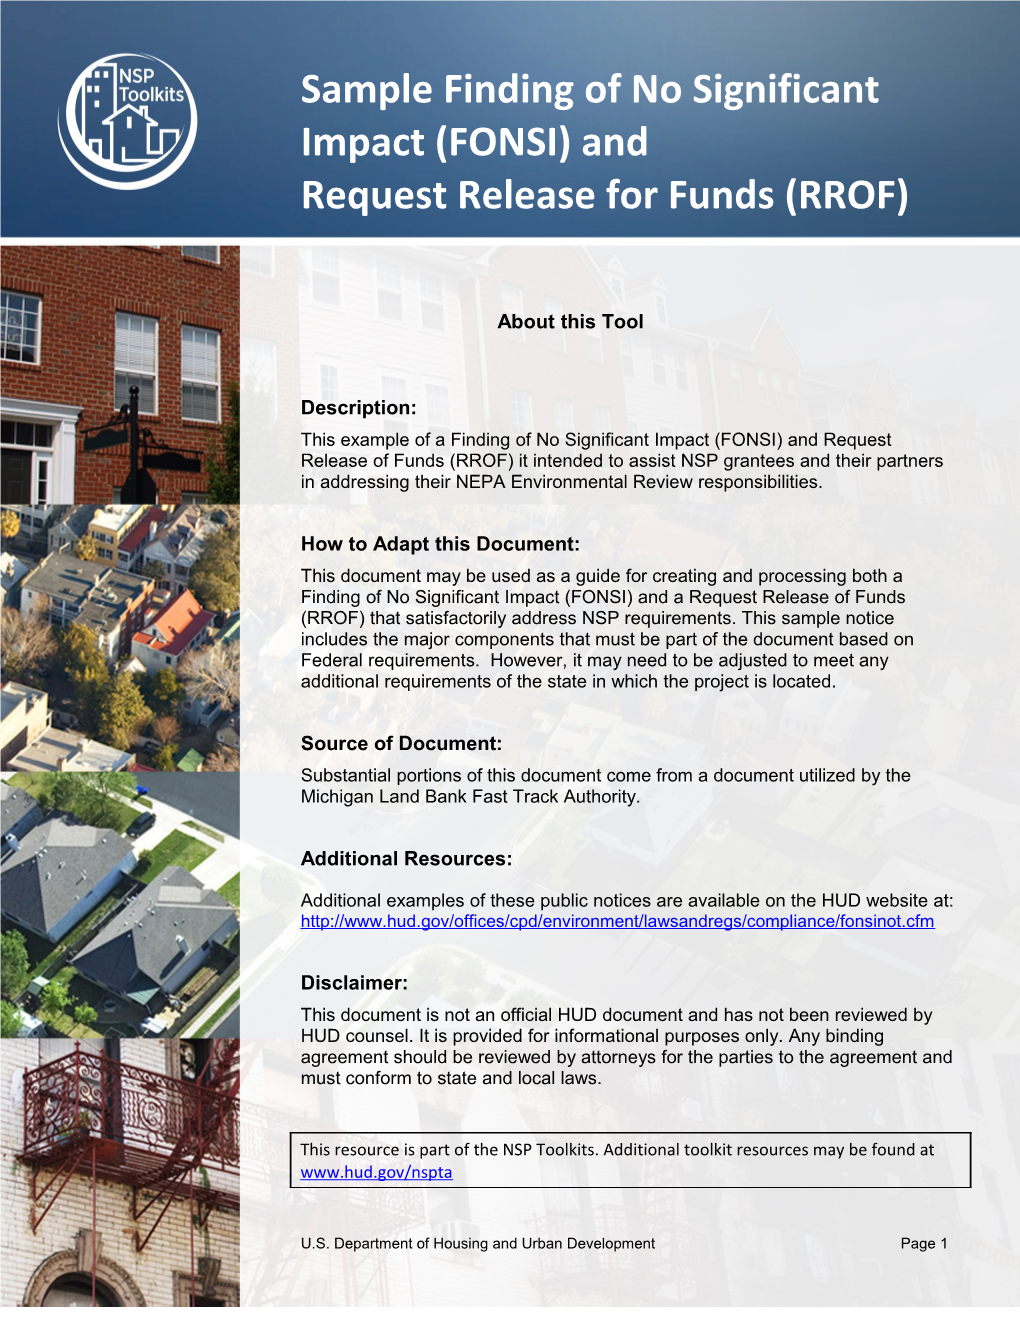 Sample Finding of No Significant Impact (FONSI) and Request Release for Funds (RROF)